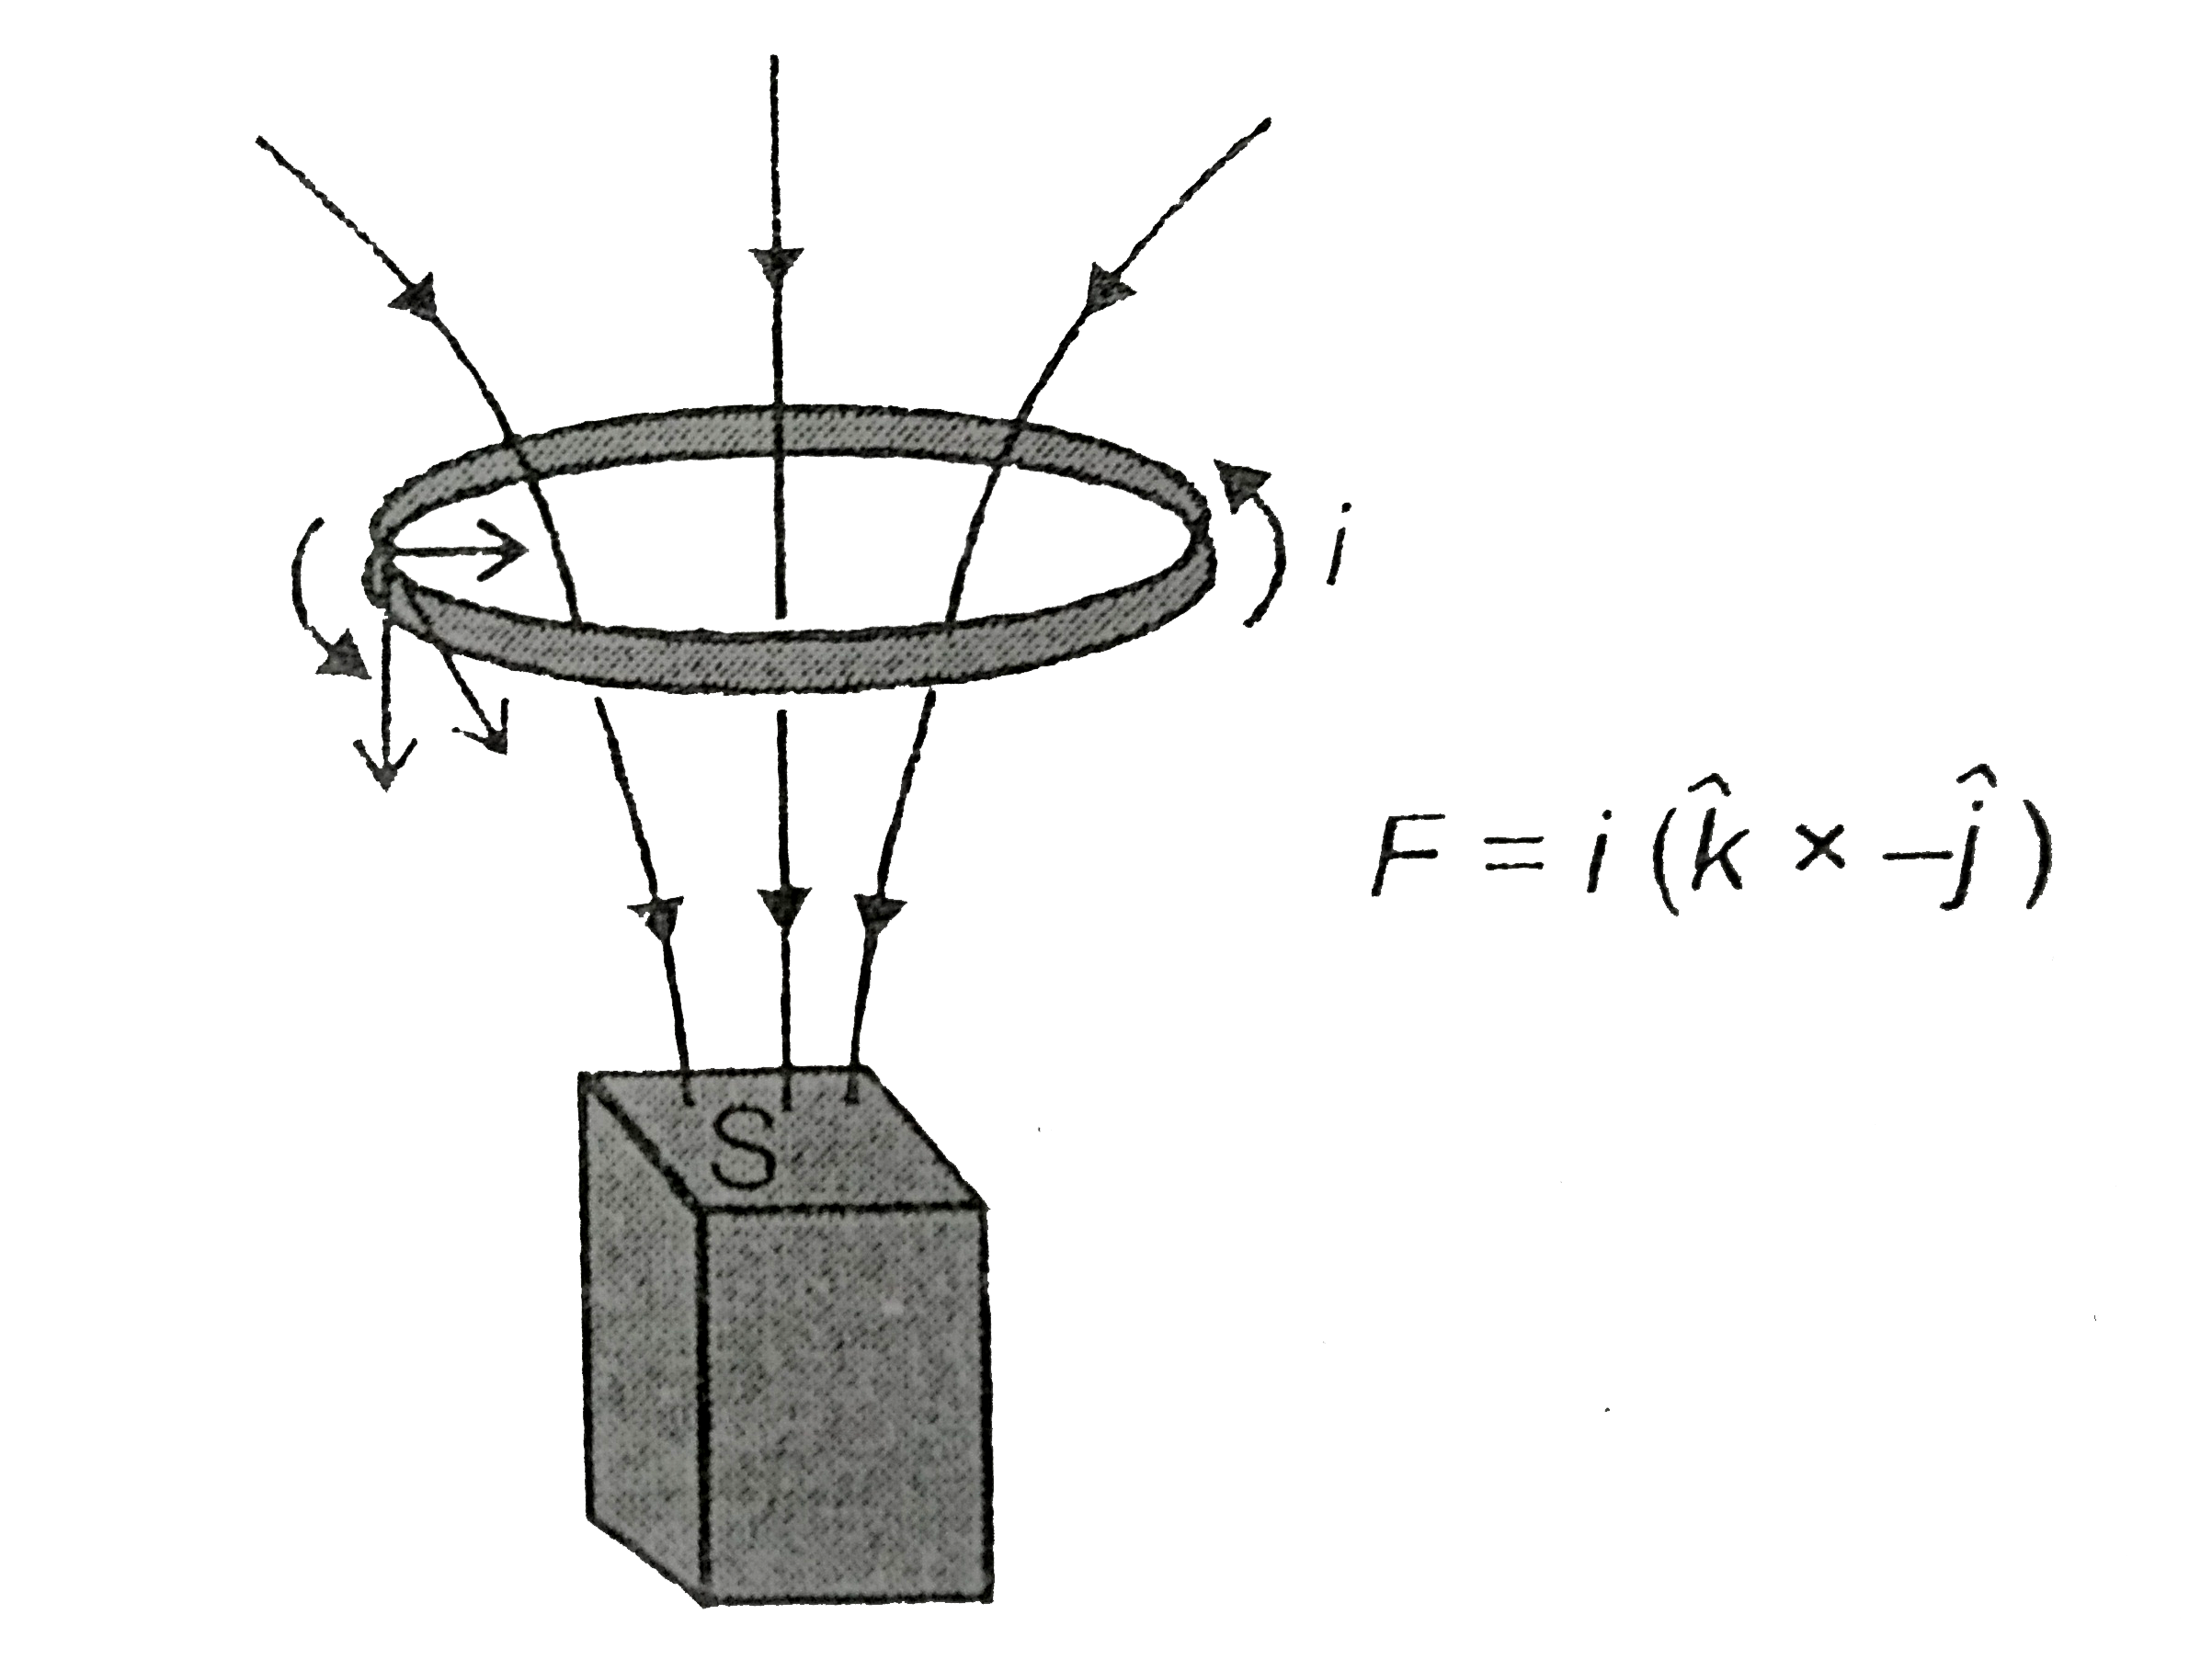 Statement-1 In the arrangement shown, the hoop carries a constant current. This hoop can remain stationary under the effect of magnetic field of the bar magnet      Statement-2 When a magnetic dipole is placed in a non-uniform magnetic field. It experiences a force opposite to direction of external magnetic field at its centre